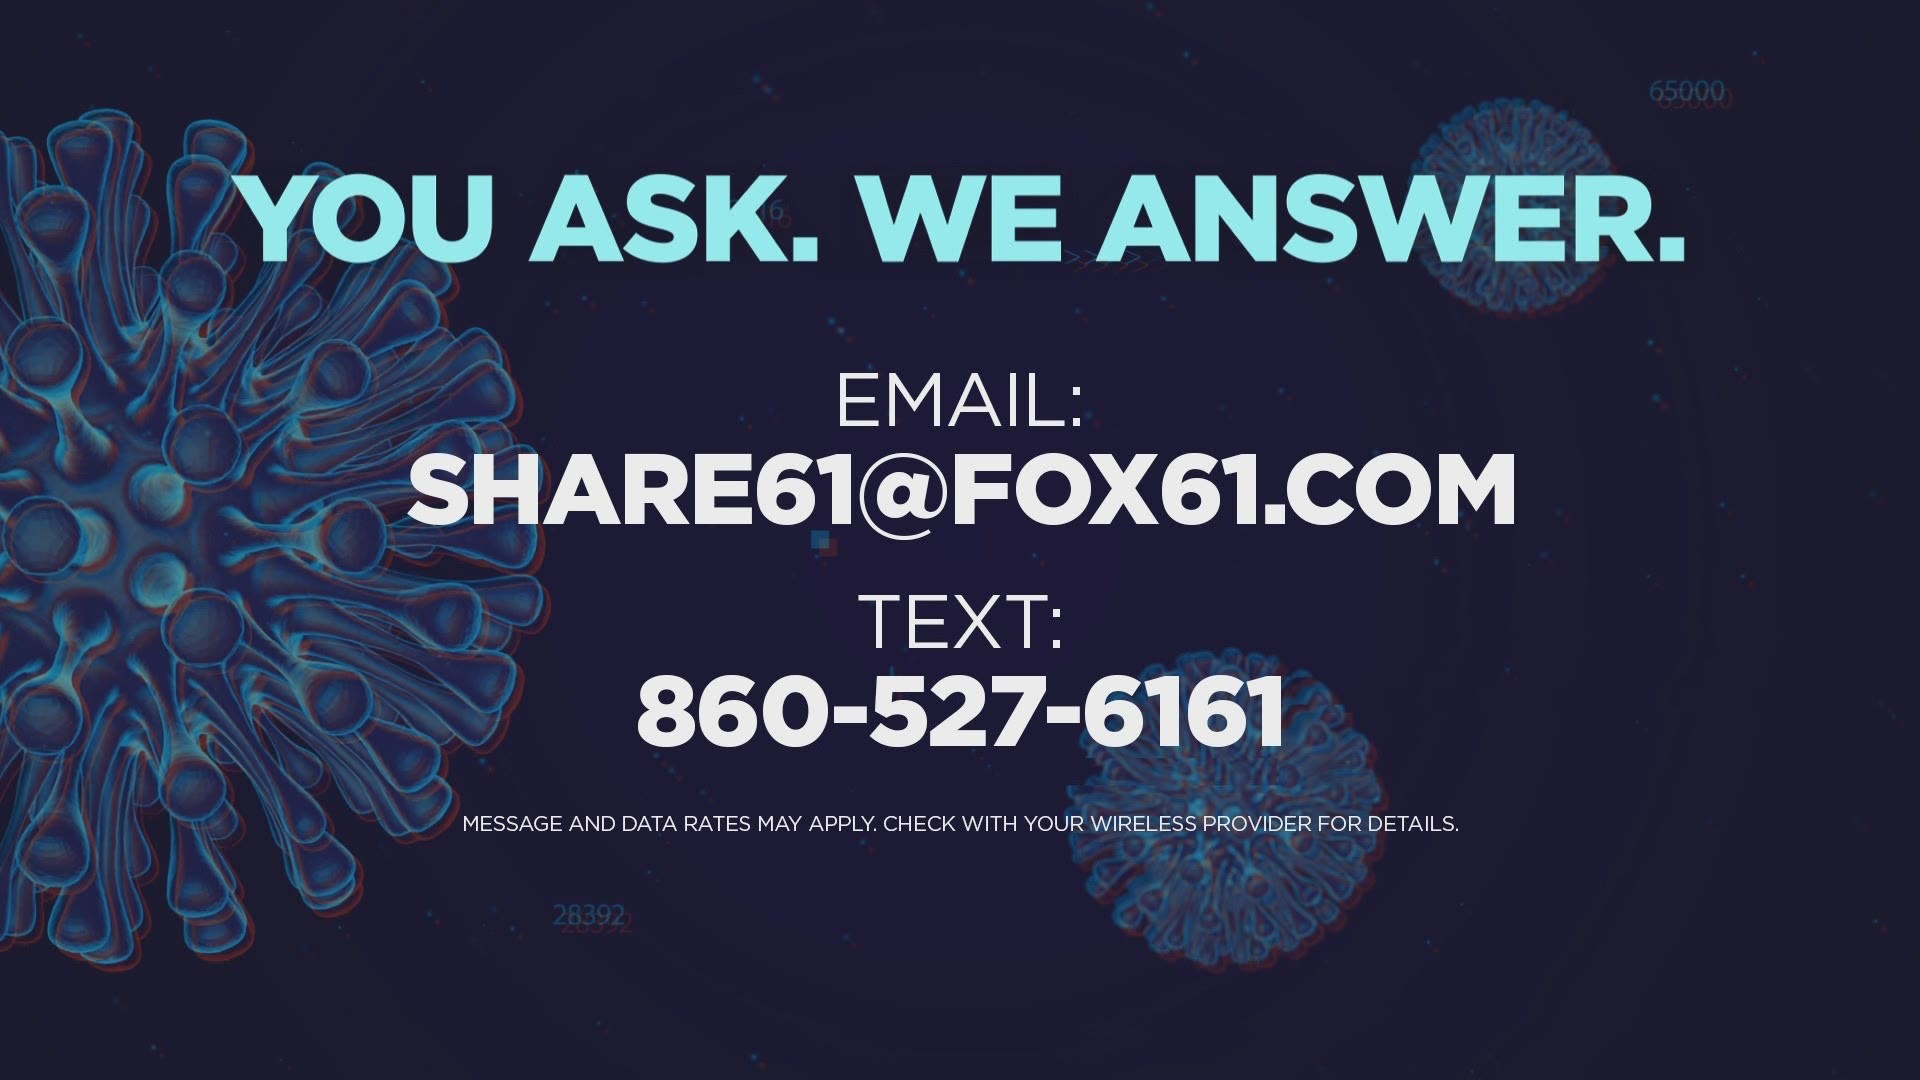 If your question hasn't been answered, send it to us at share61@fox61.com.